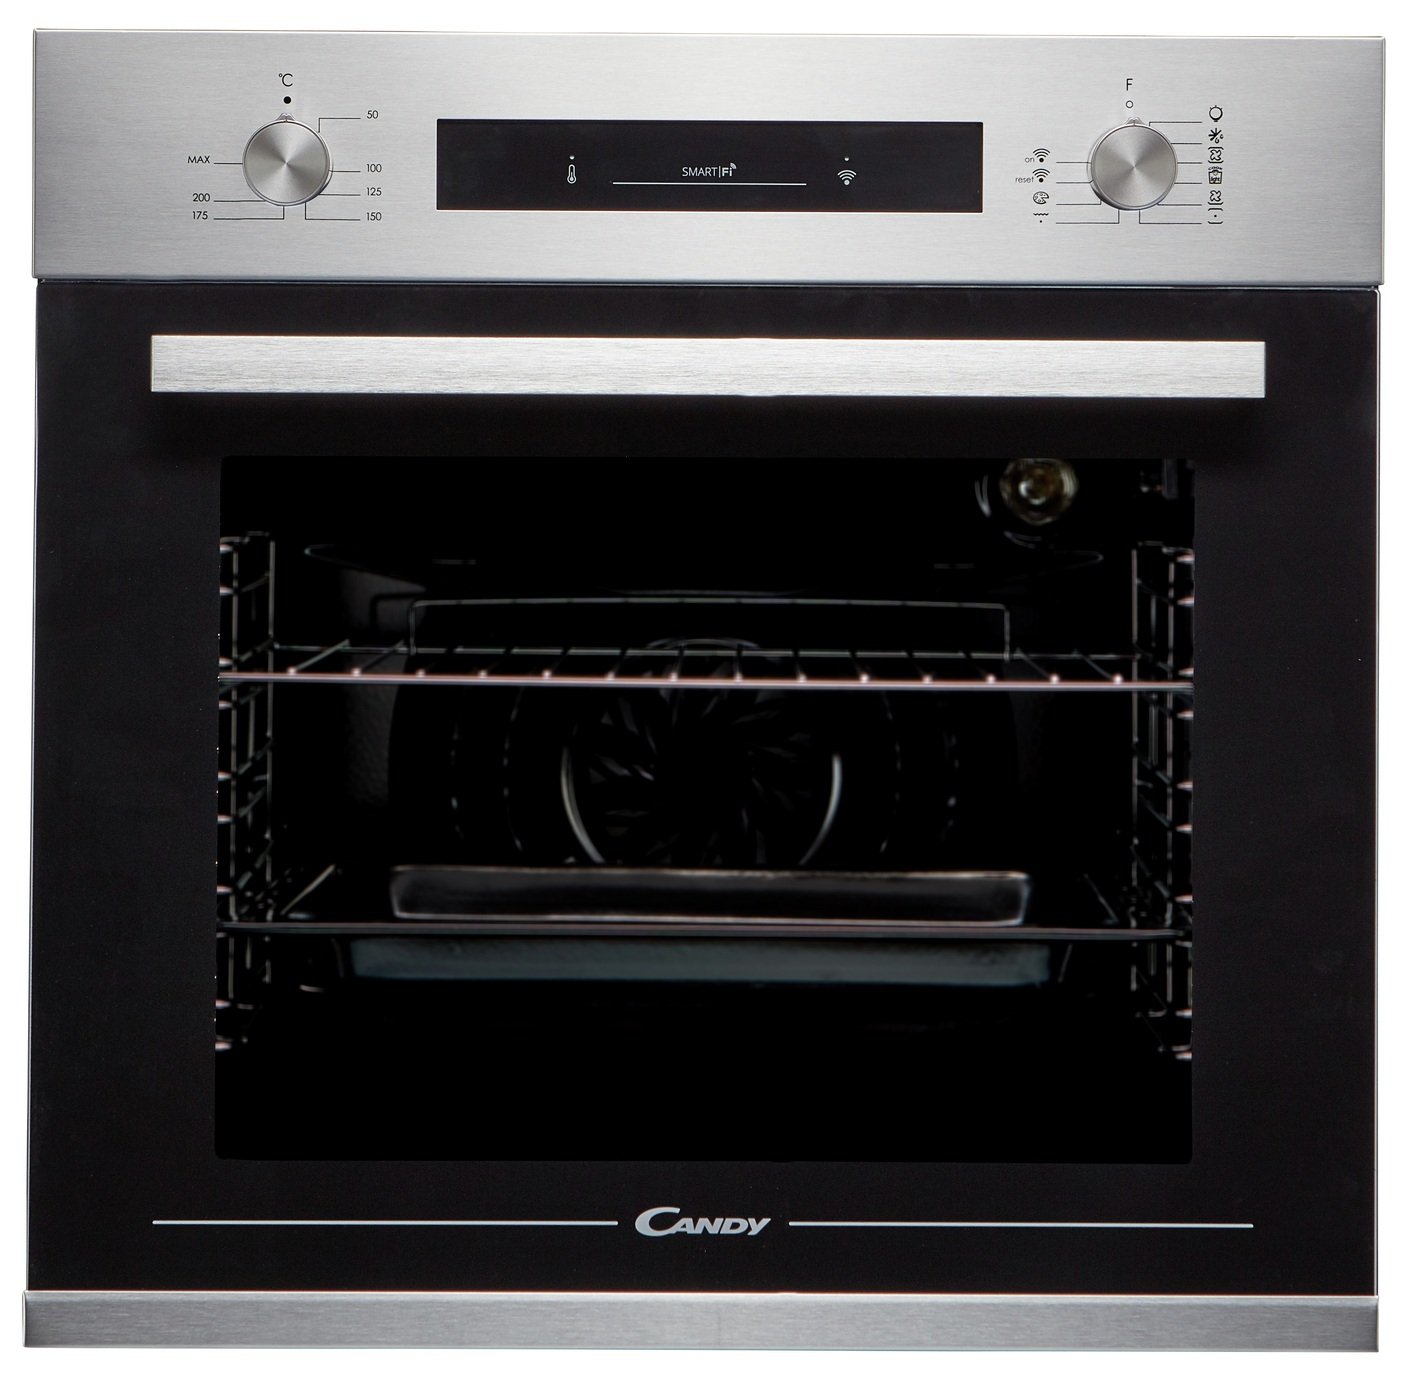 Candy FCP602X/E Single WIFI Oven review